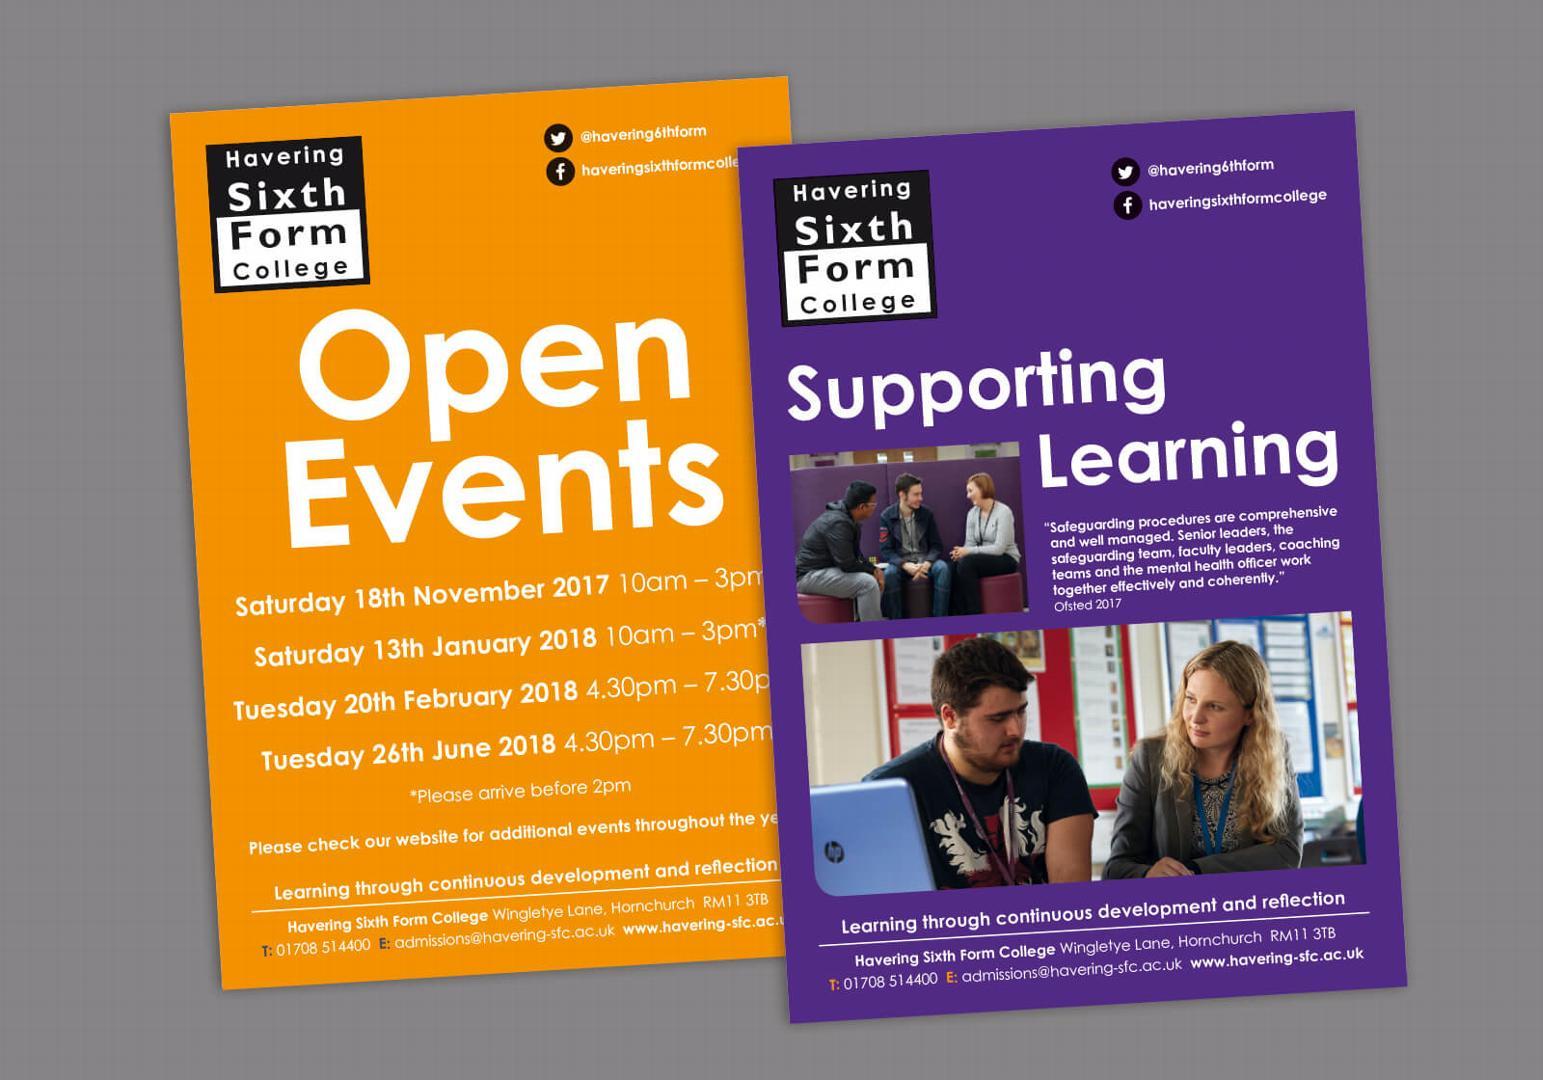 Offline marketing support for Havering Sixth Form College